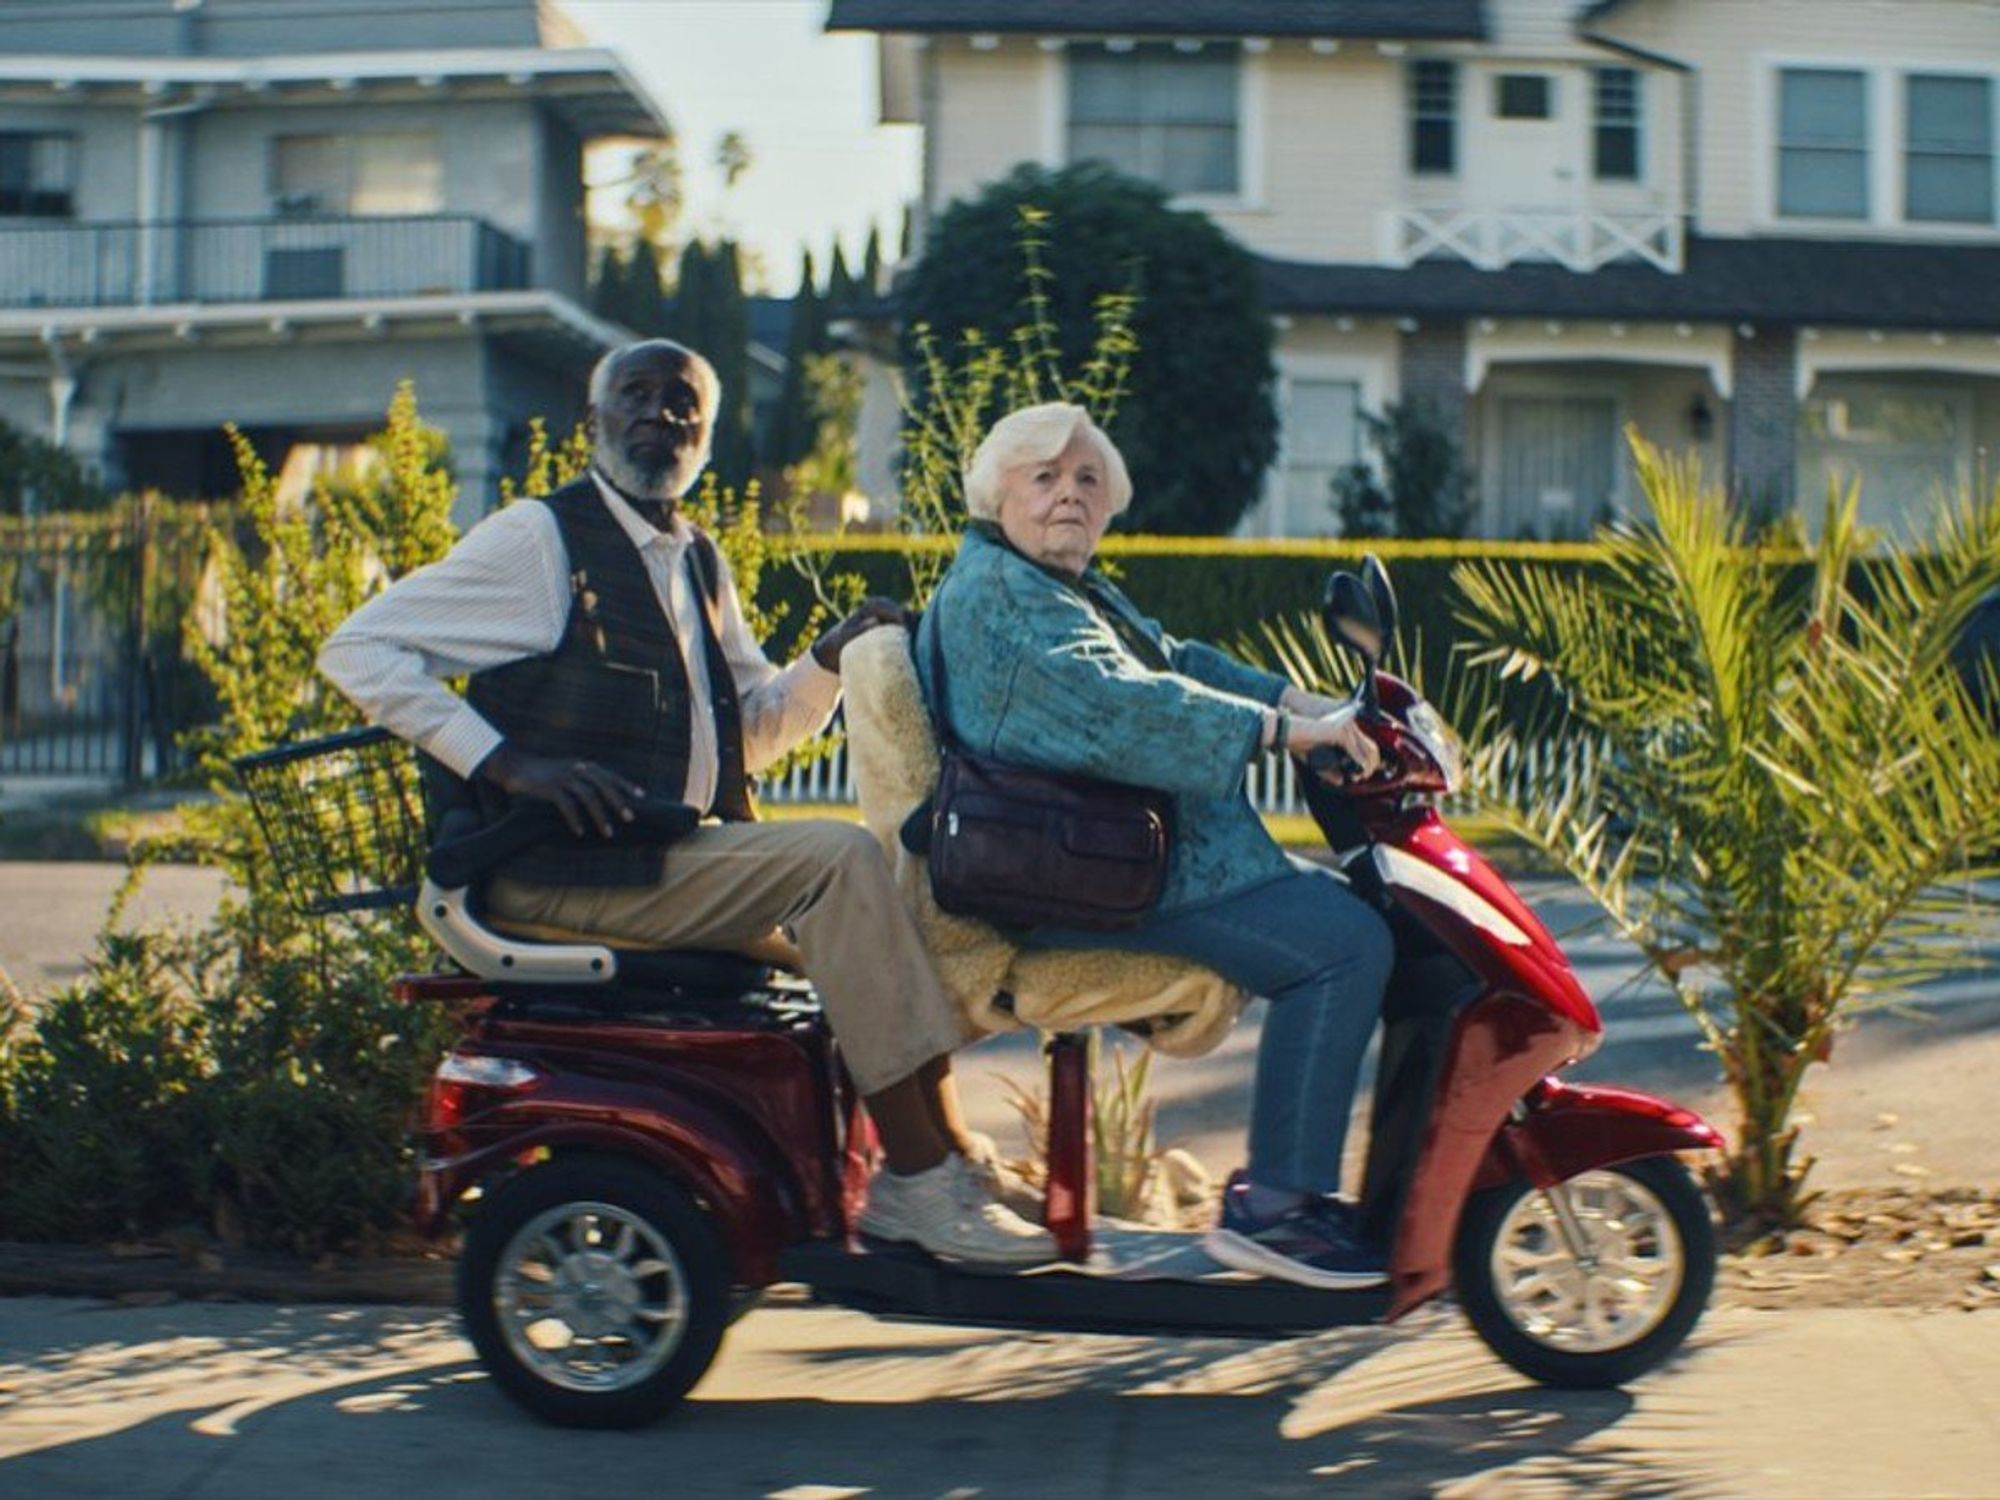 Richard Roundtree and June Squibb in Thelma